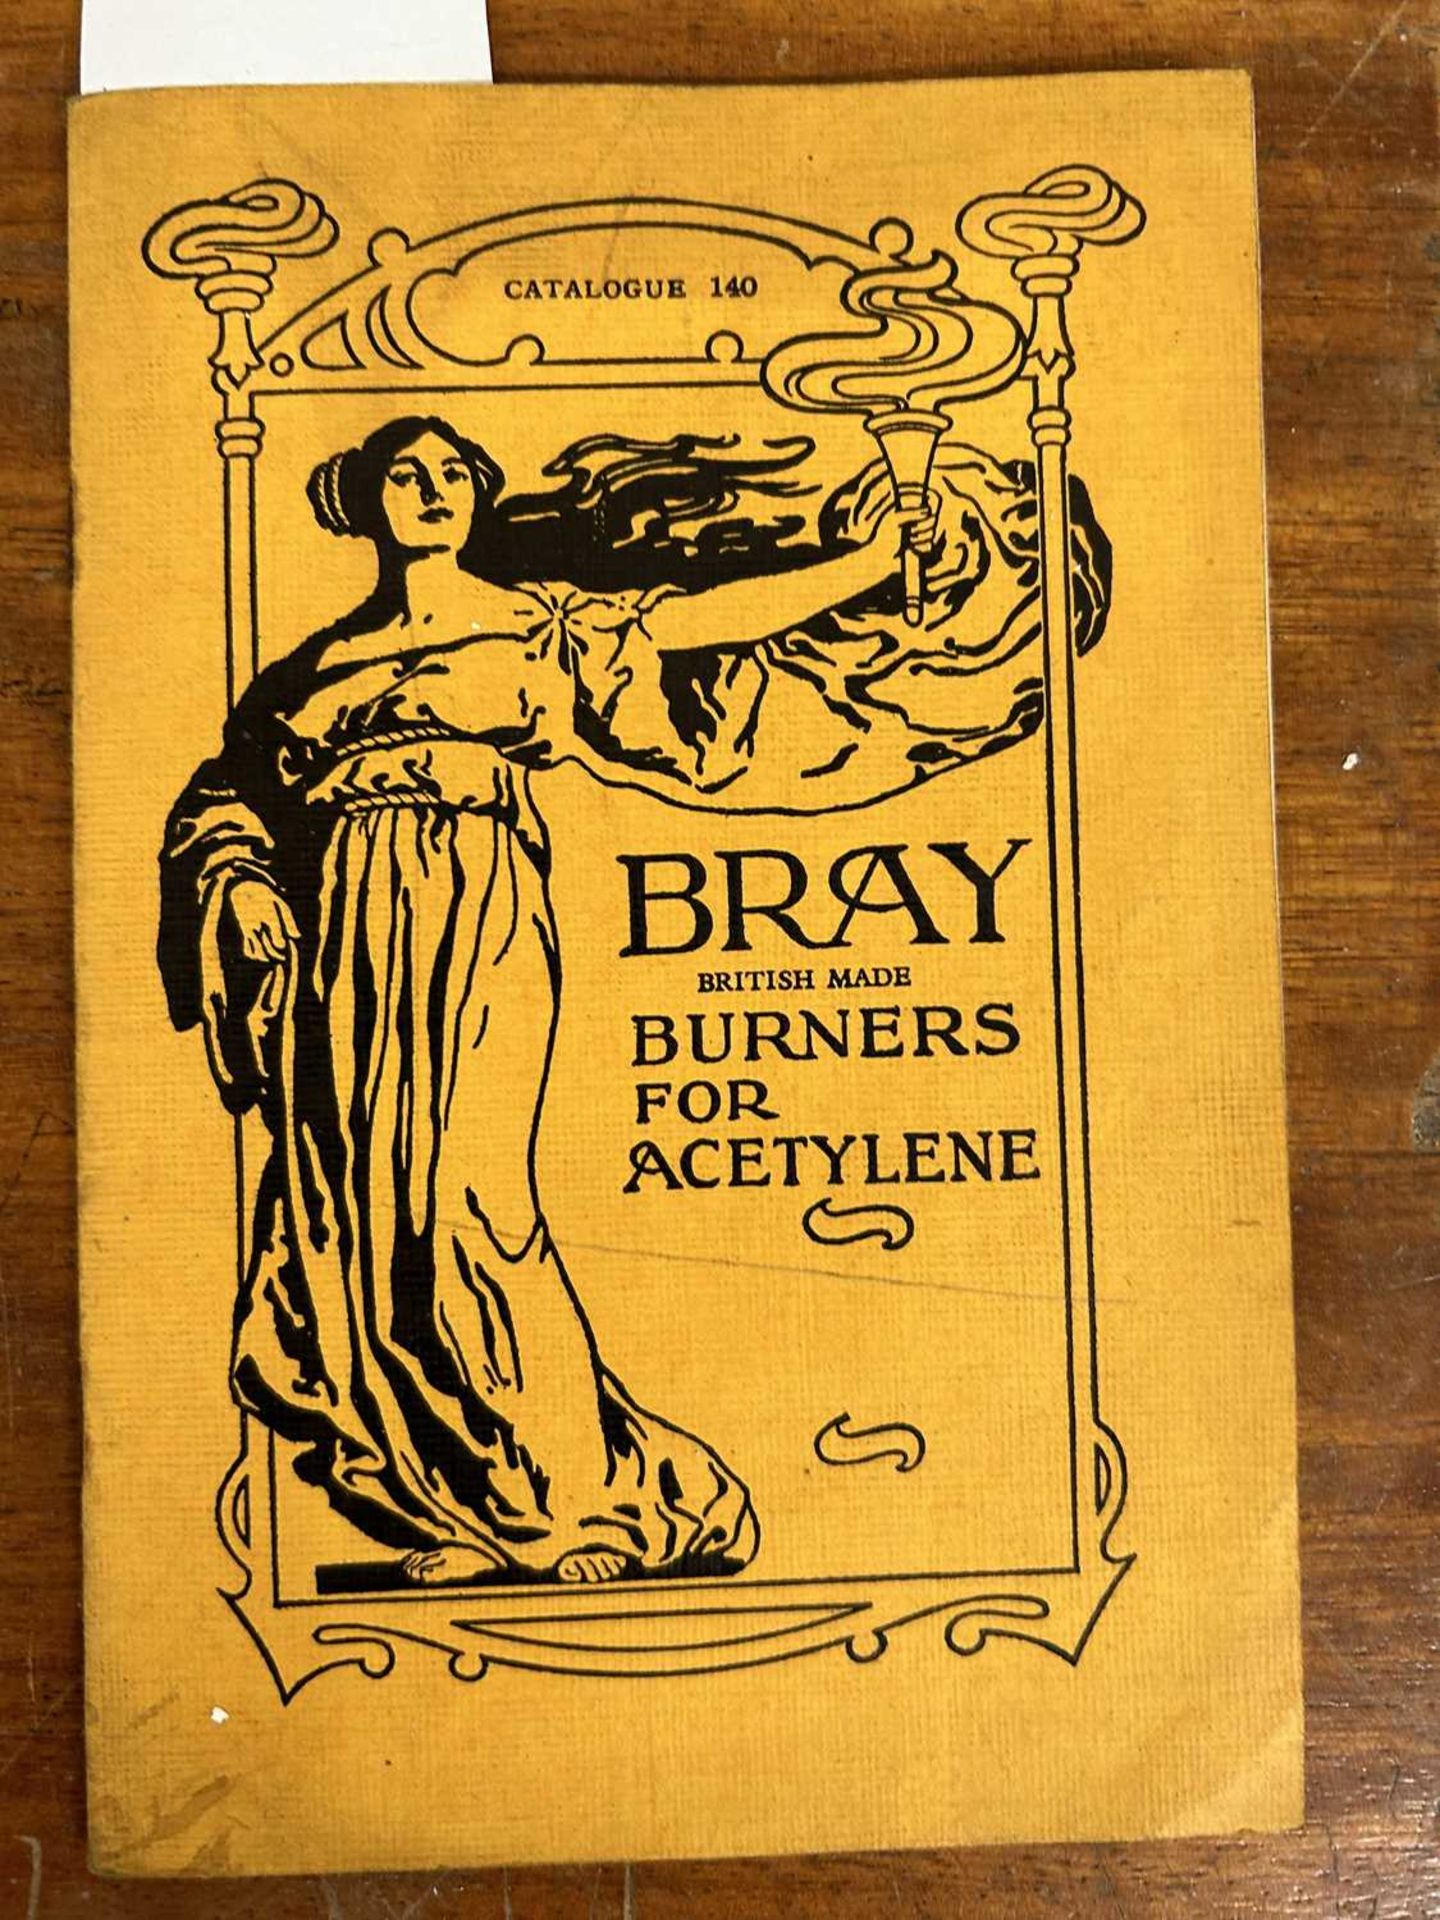 Bray 'Burners for acetylene' catalogue together with a 'Locomobile' advertising brochure